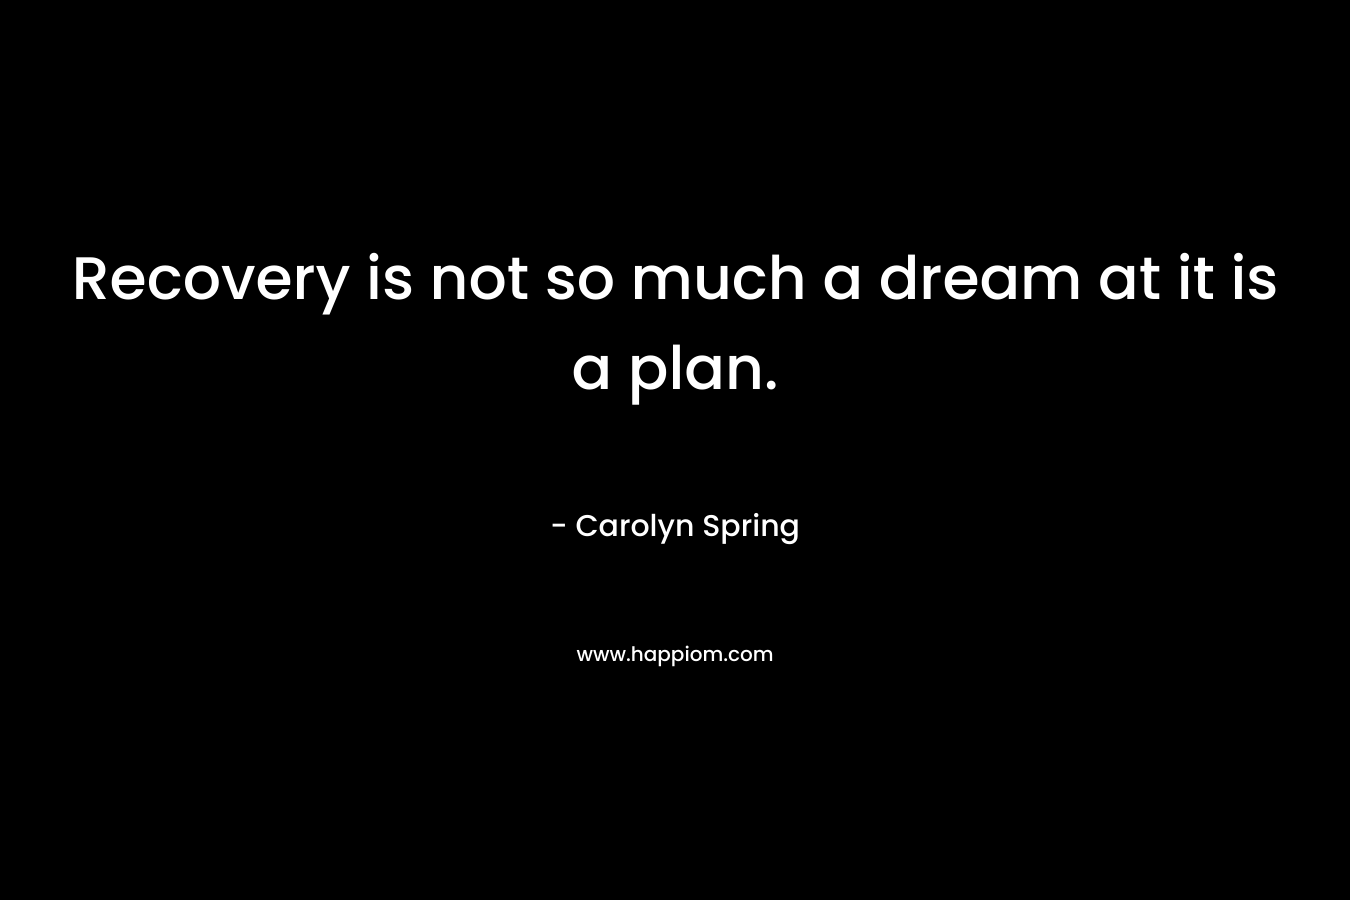 Recovery is not so much a dream at it is a plan.